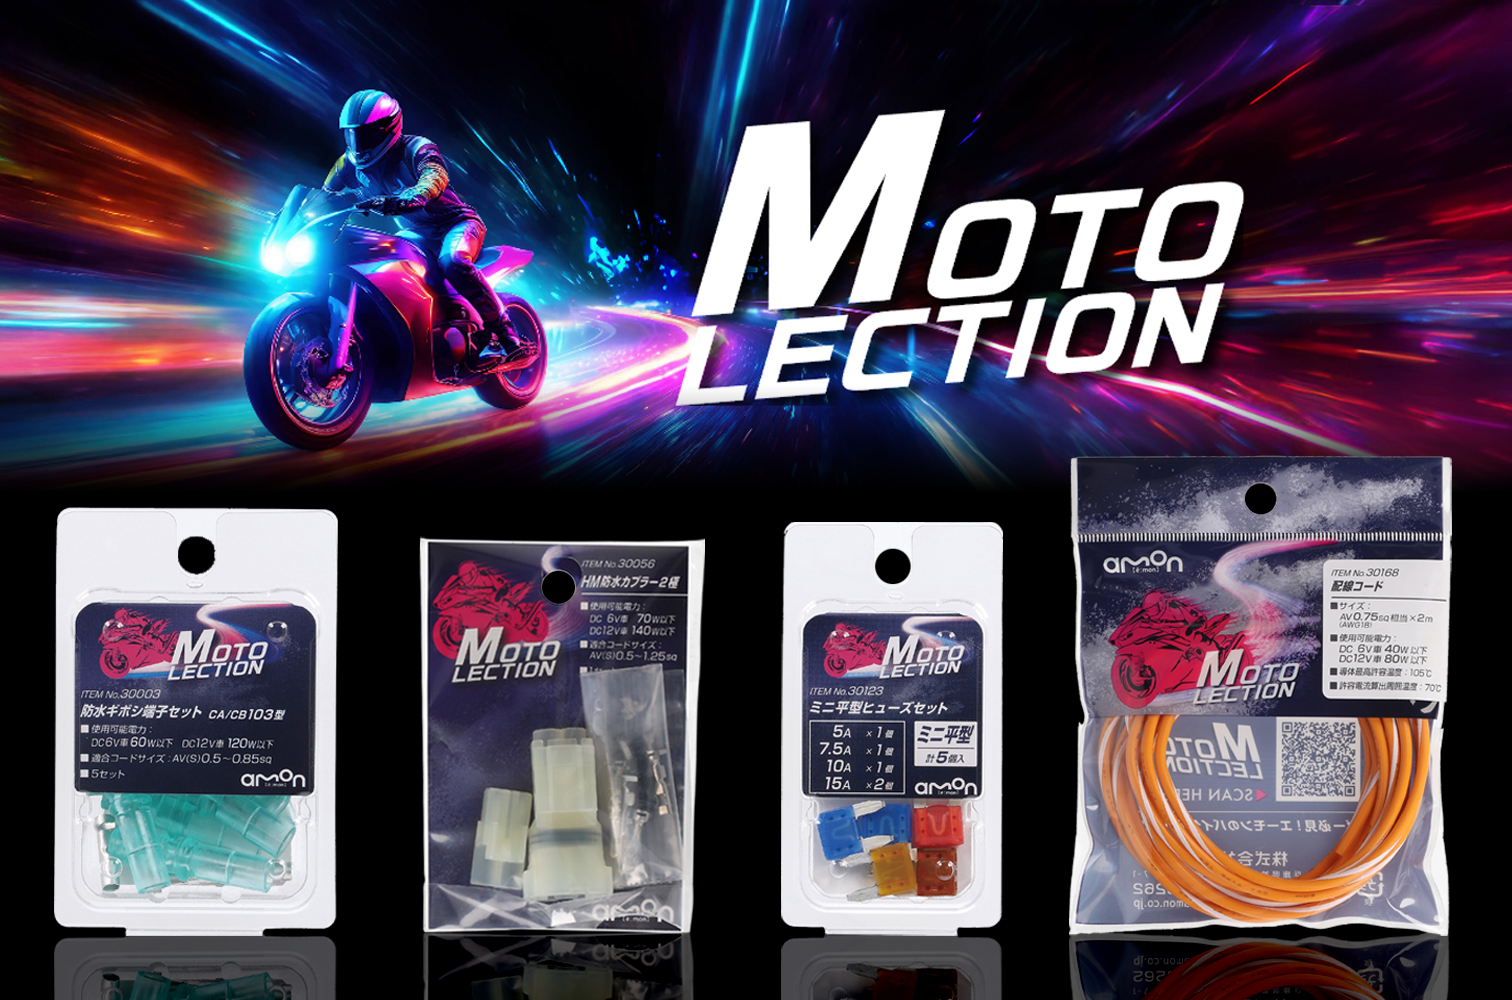 MOTOLECTION2